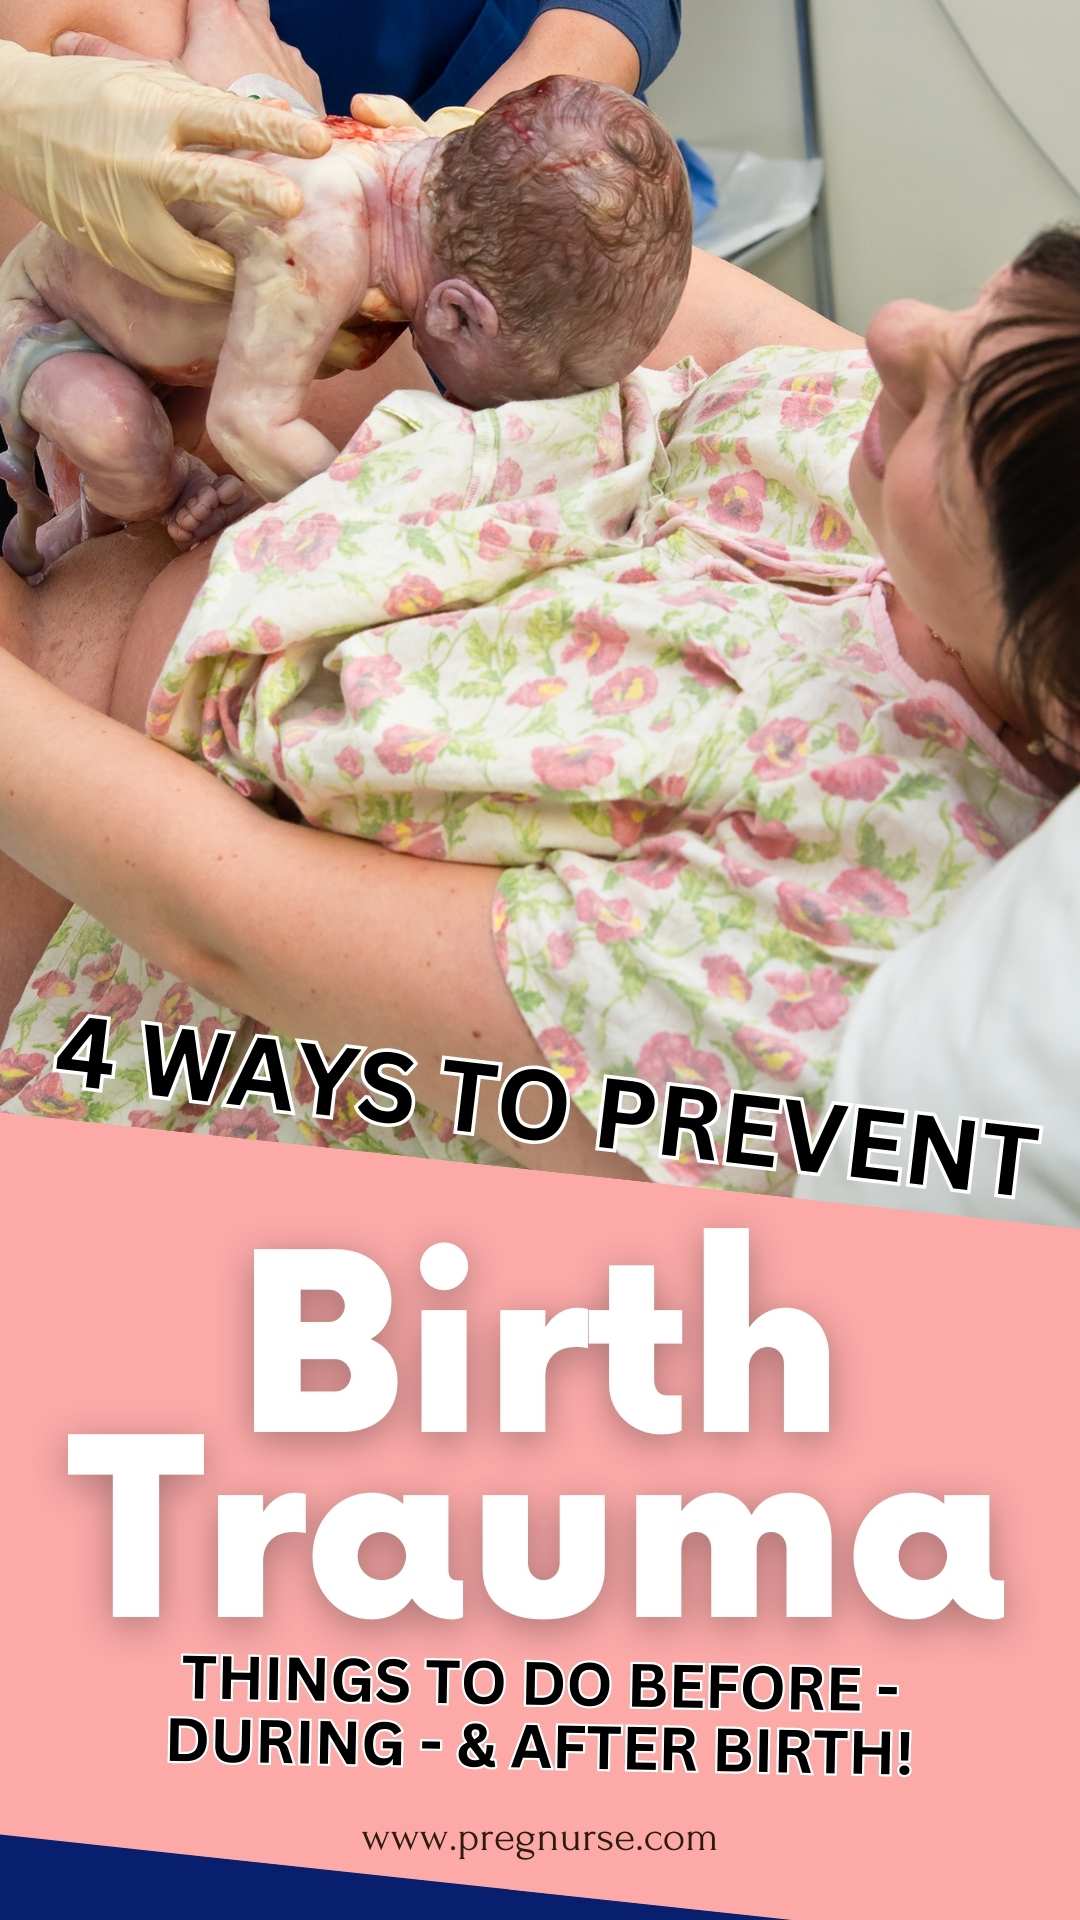 Having a baby can be an incredible experience, but there is a risk of birth trauma. Whether it’s physical or emotional, birth trauma can have an immense impact on the baby and their parents. Fortunately, there are several steps you can take to prevent birth trauma before, during, and after birth. This article will provide you with four ways to decrease the risk of birth trauma for mom and baby, from creating a calming environment before delivery to providing emotional support afterward.